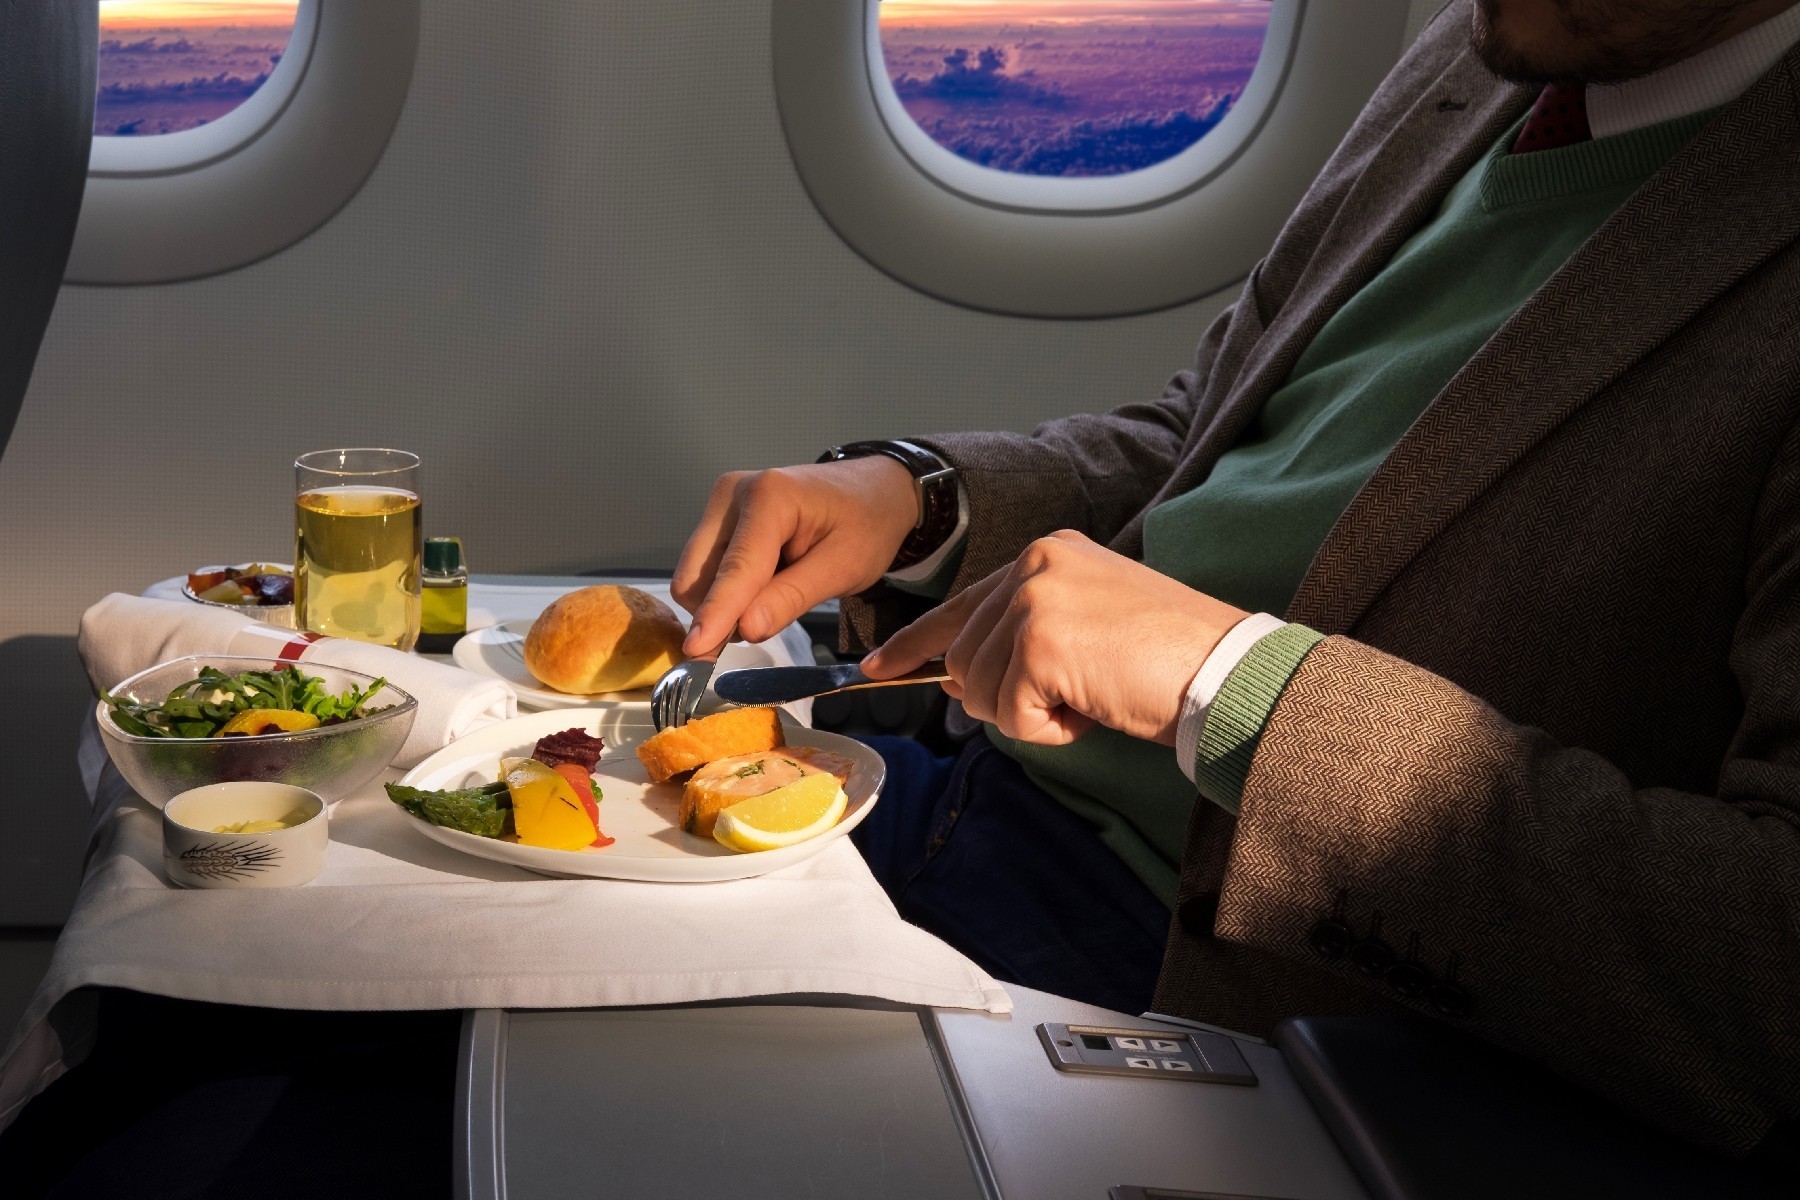 <p>Even if you can’t upgrade to first class, some airlines are now allowing economy class passengers to <a href="https://www.cntraveler.com/story/how-to-get-a-business-class-meal-in-economy-class" rel="noreferrer noopener">upgrade their meals</a> to more appetizing choices. Austrian Airlines, Air France, KLM and British Airways are among the airlines that let people buy better meals for a lower price than what they’d pay in a restaurant.</p>